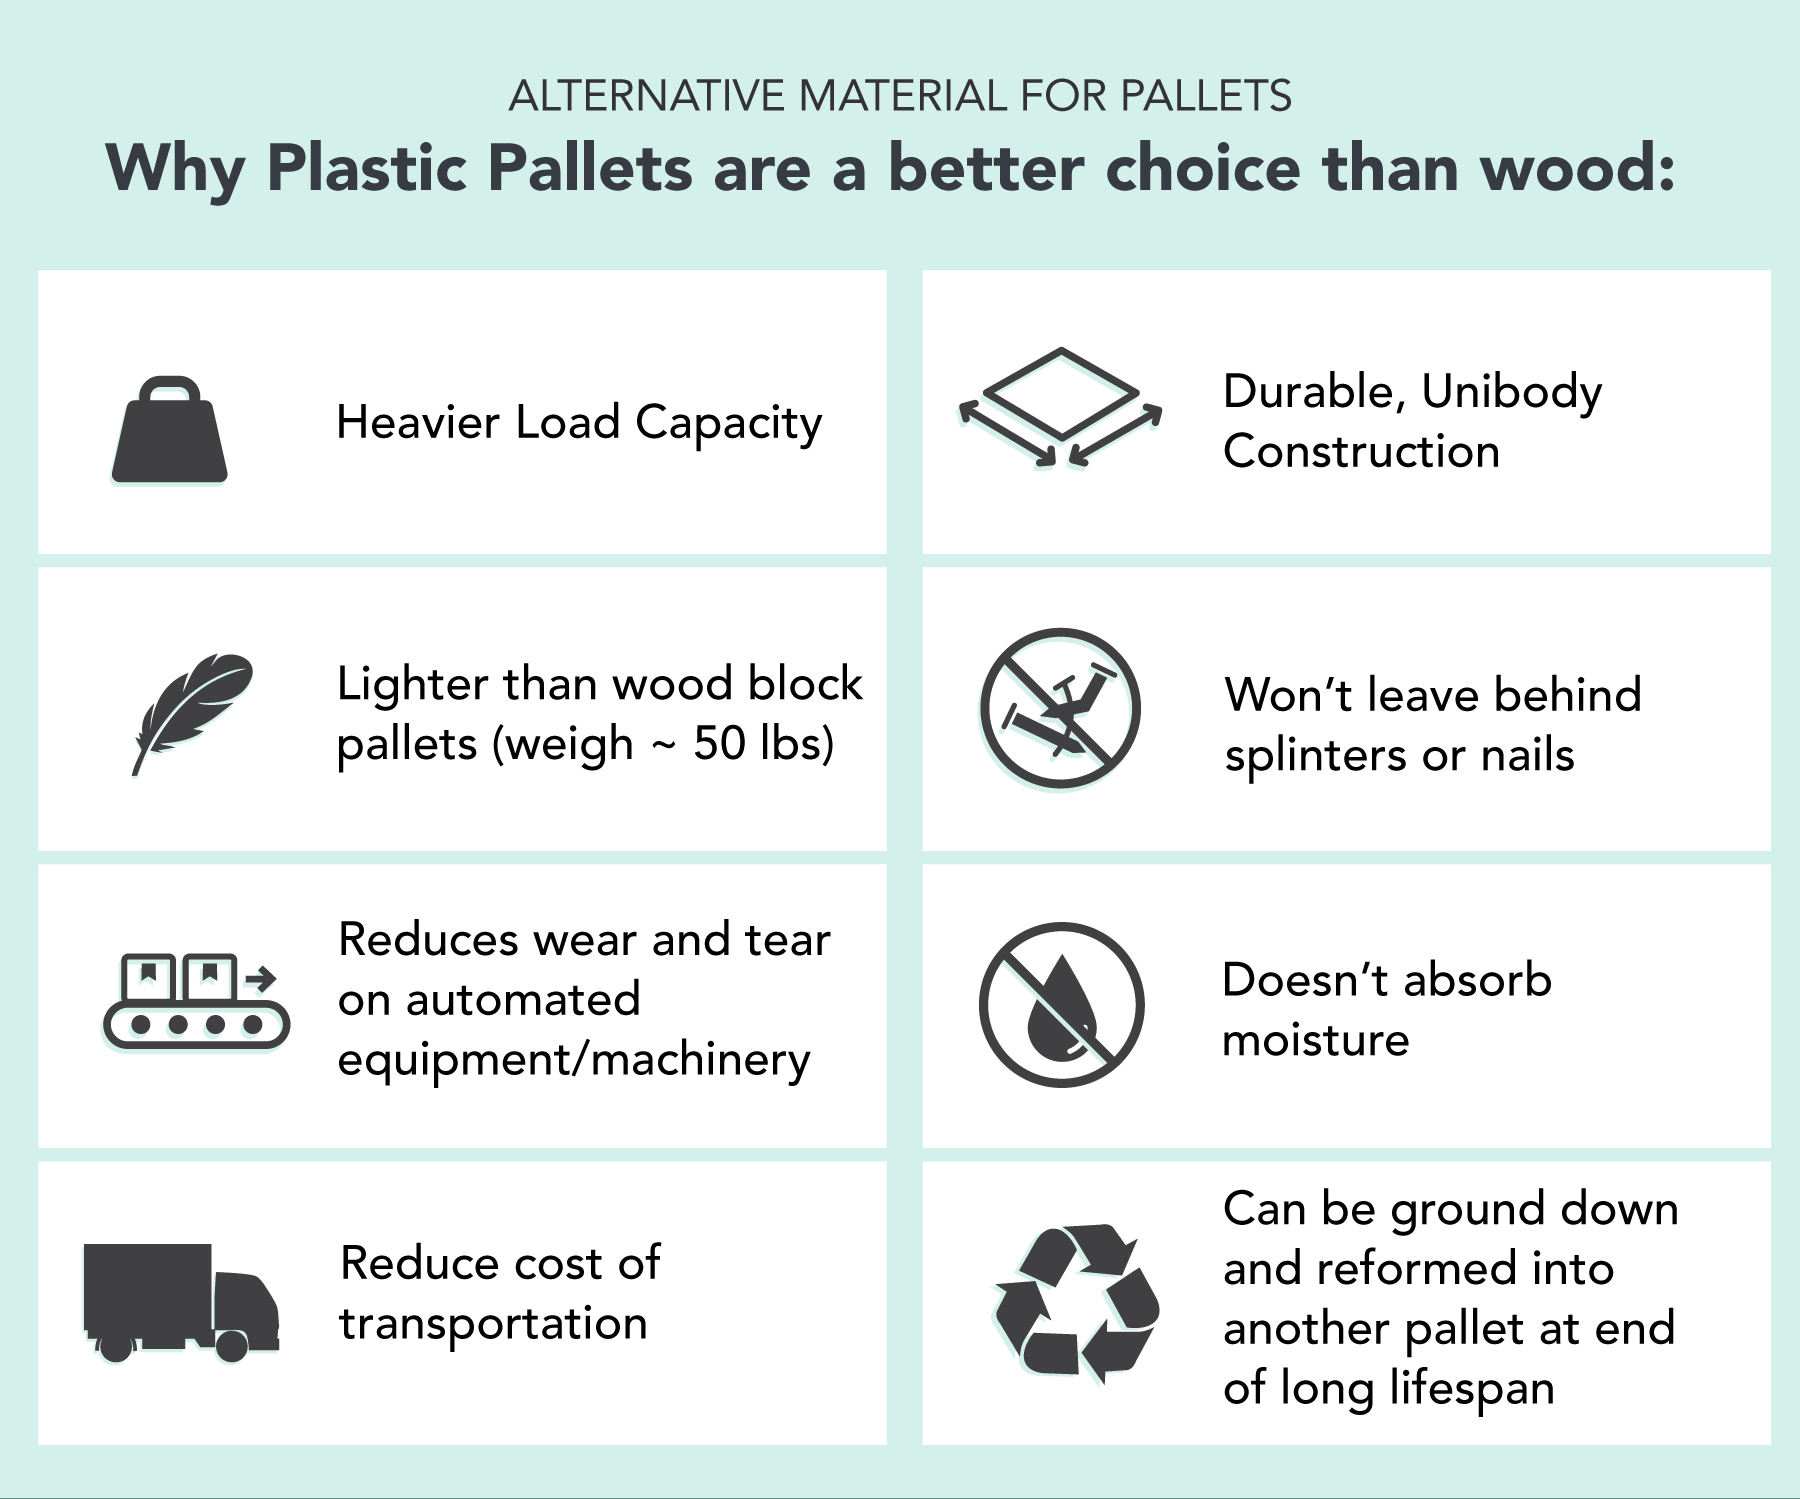 Alternative Materials for pallets: Why Plastic Pallets are a better choice than wood 